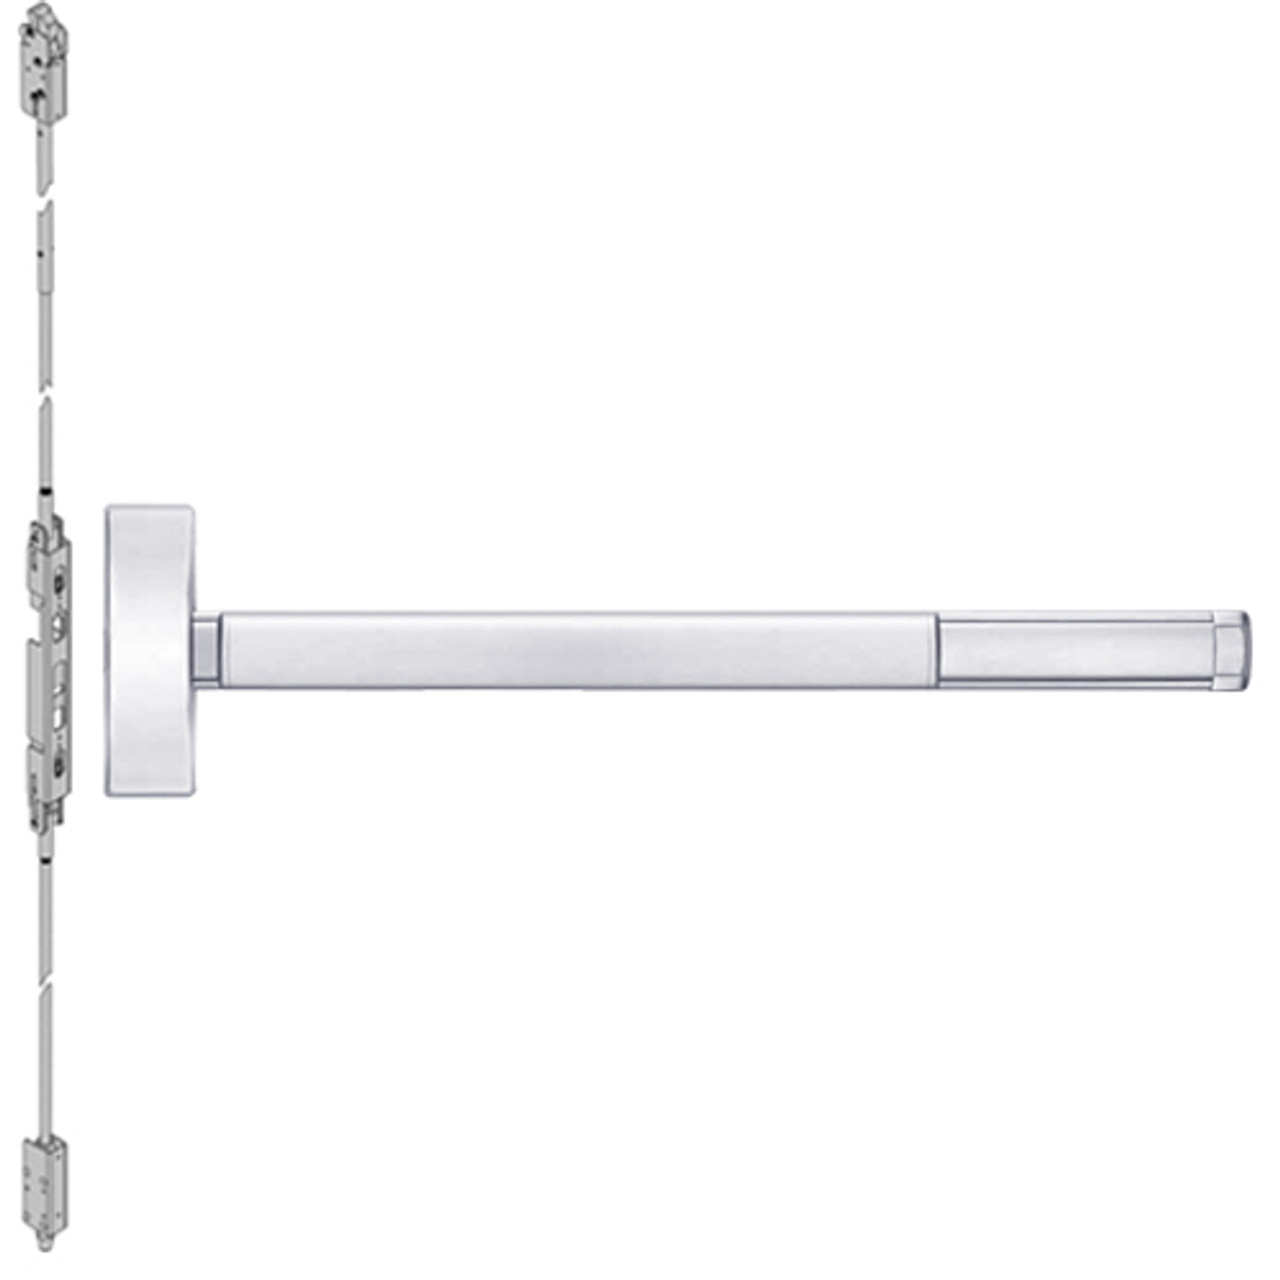 DEFL2814LBR-625-48 PHI 2800 Series Fire Rated Concealed Vertical Rod Exit Device with Delayed Egress Prepped for Lever-Knob Always Active in Bright Chrome Finish